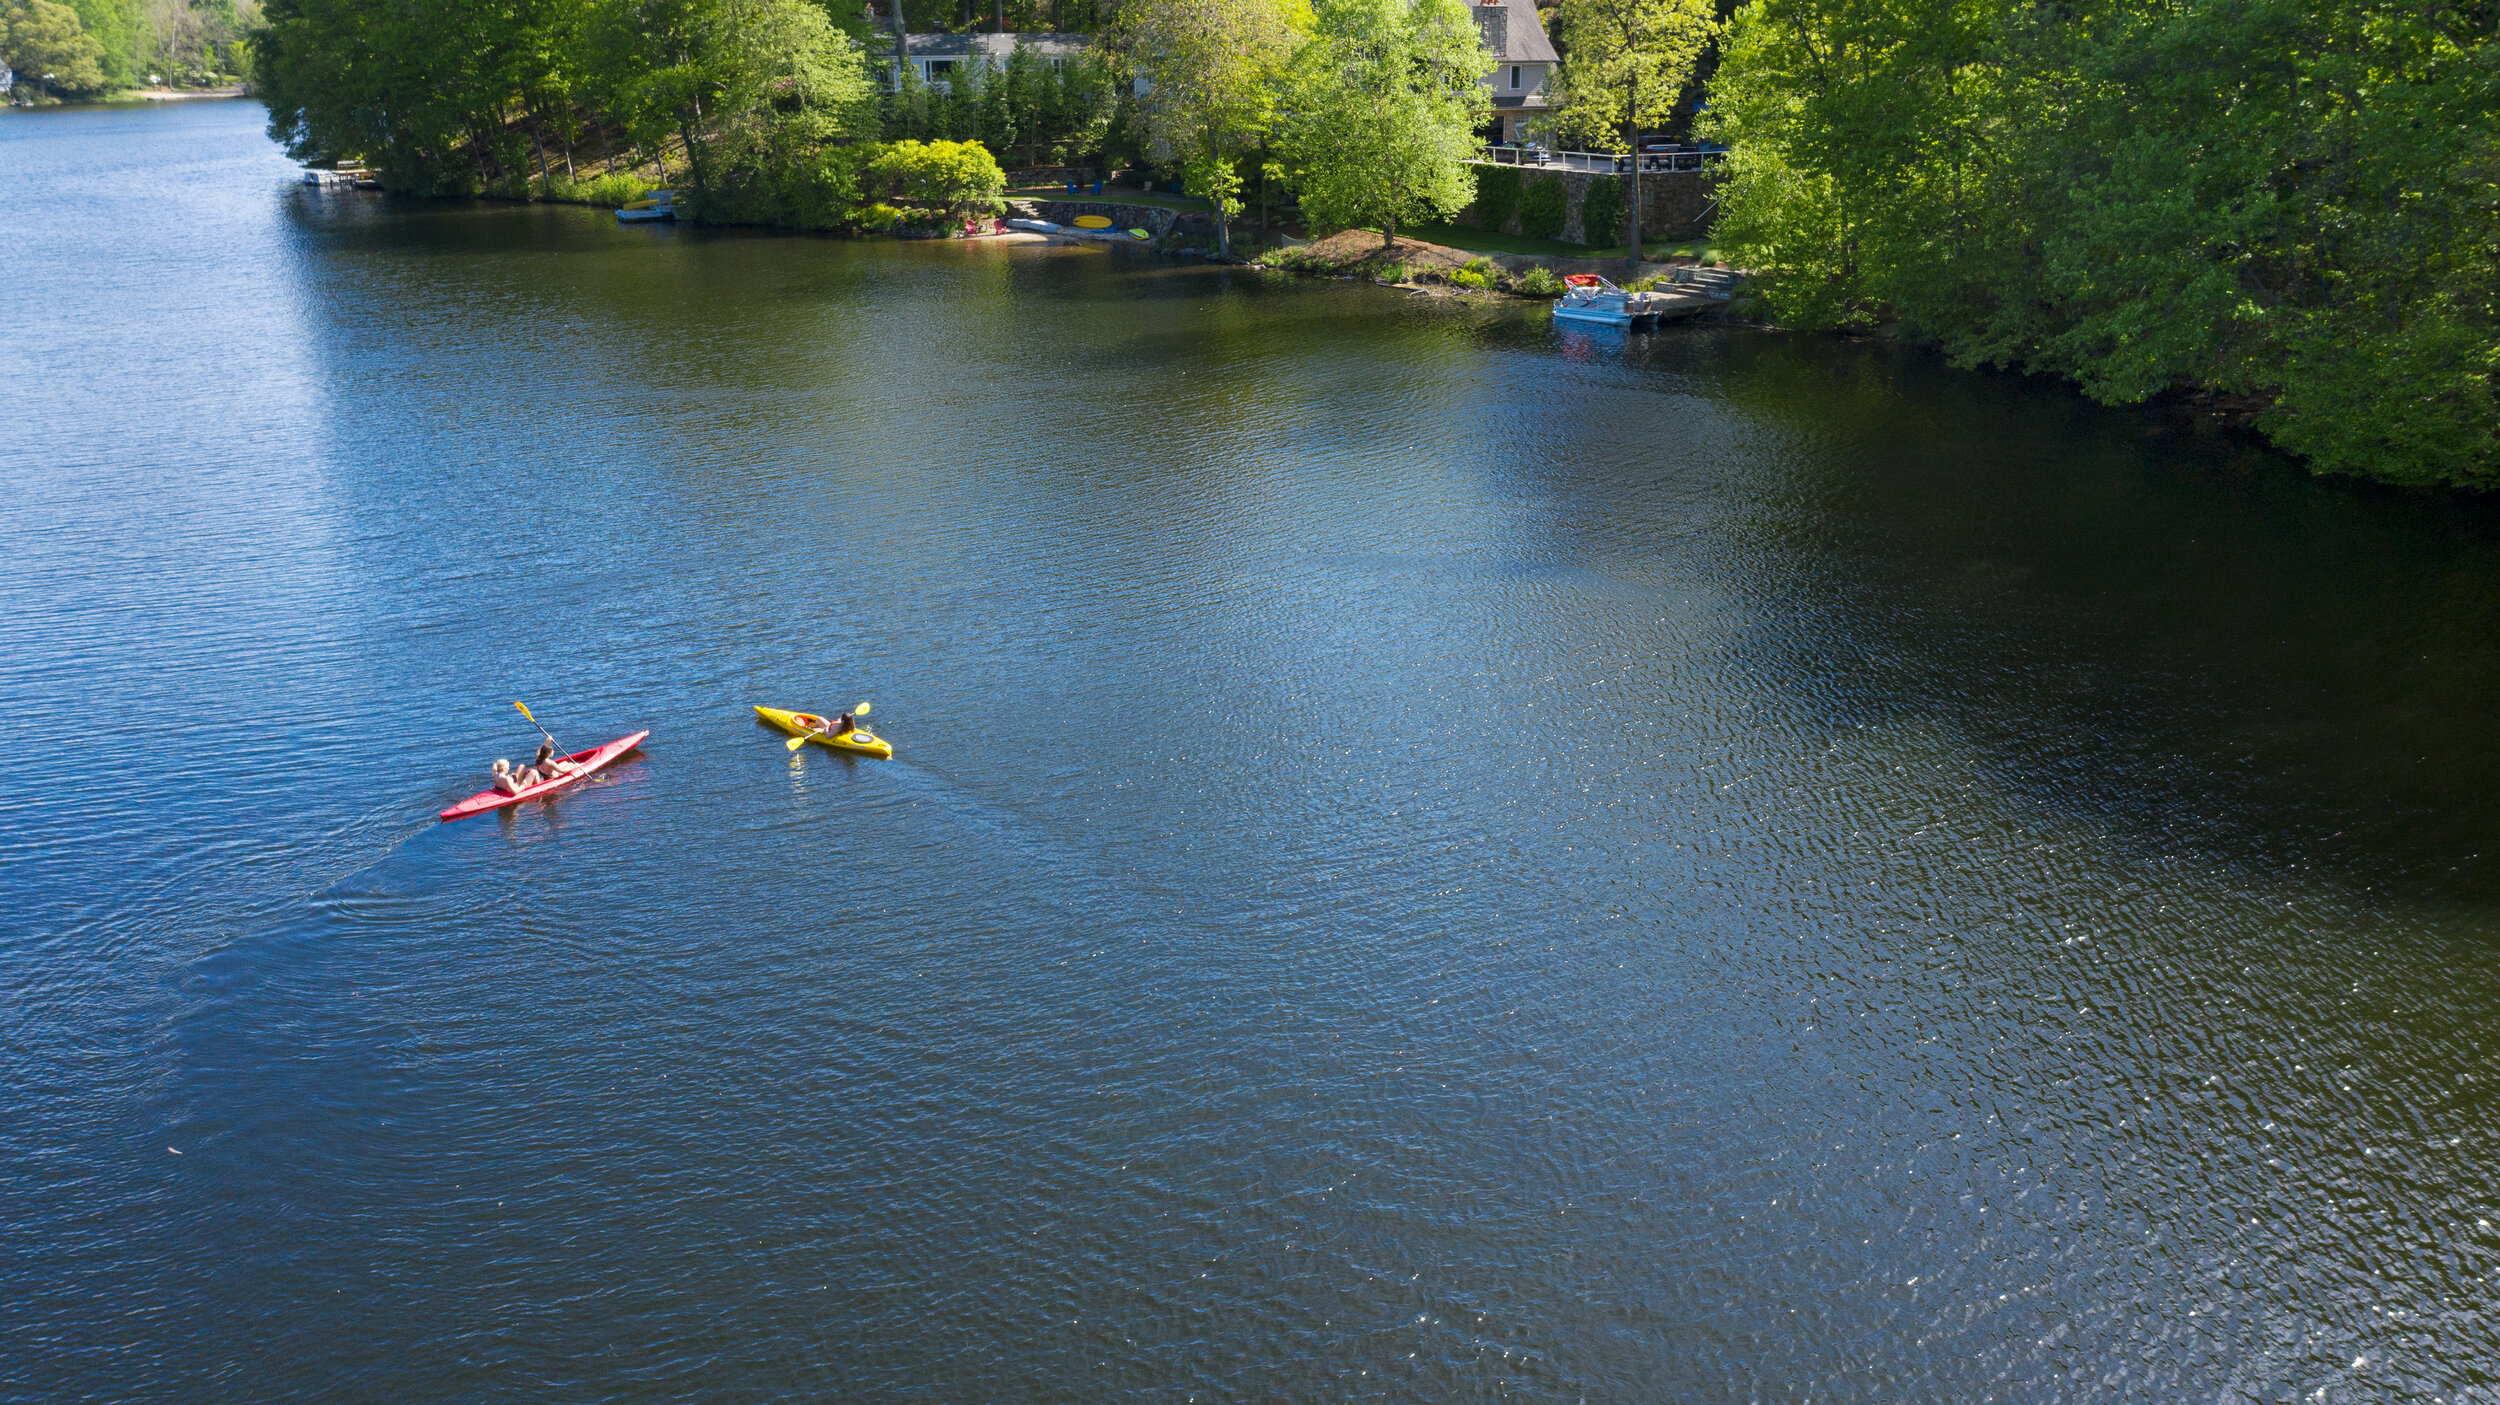 EF_Drone_Canoing_1.jpg